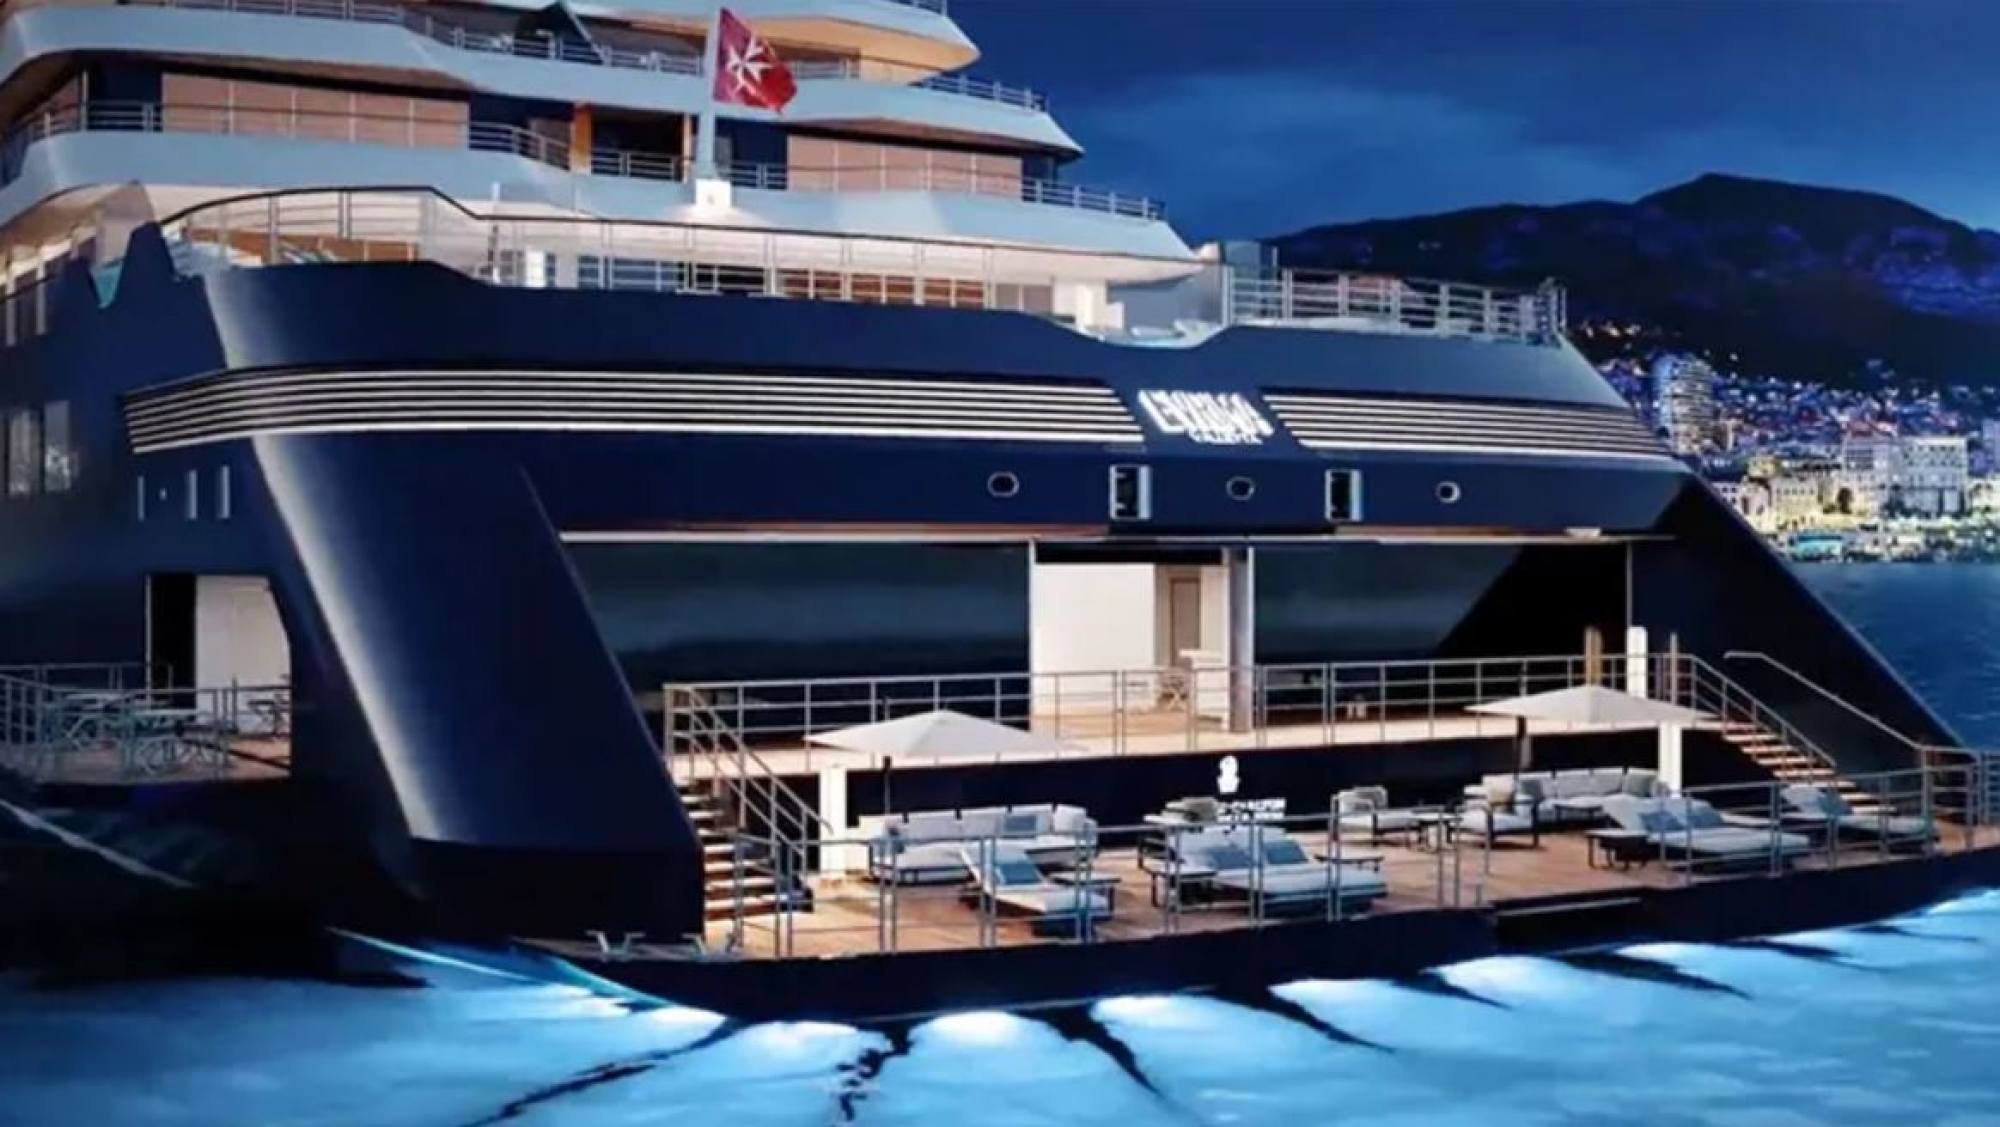 The Ritz-Carlton to get into the yachting business